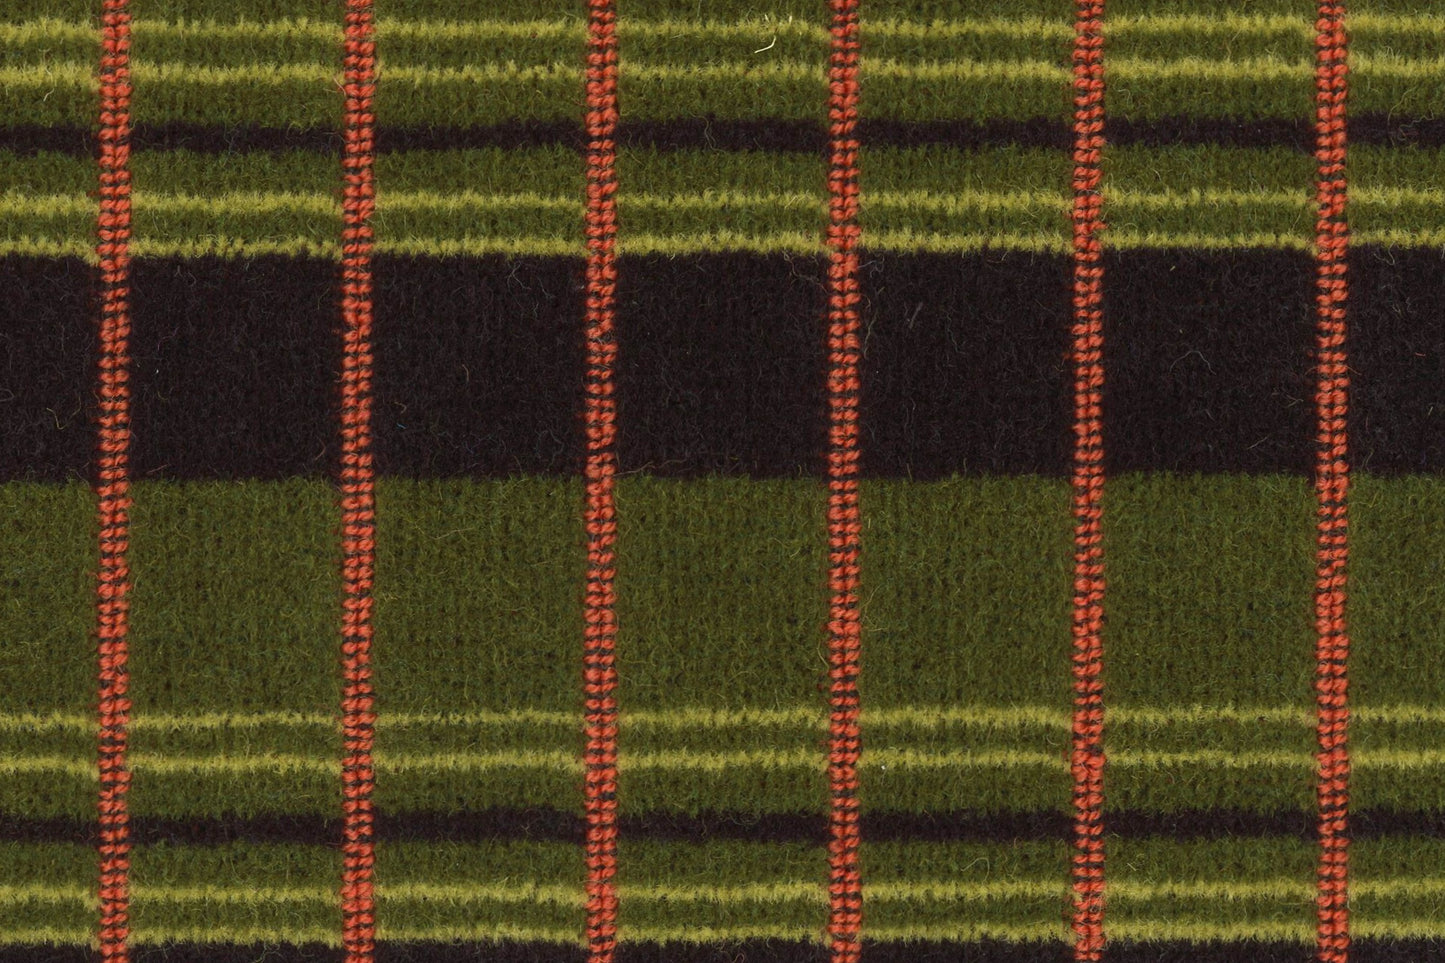 London Bus & London County Green Line (Greenlines)Bus Moquette Fabric sold by the Metre